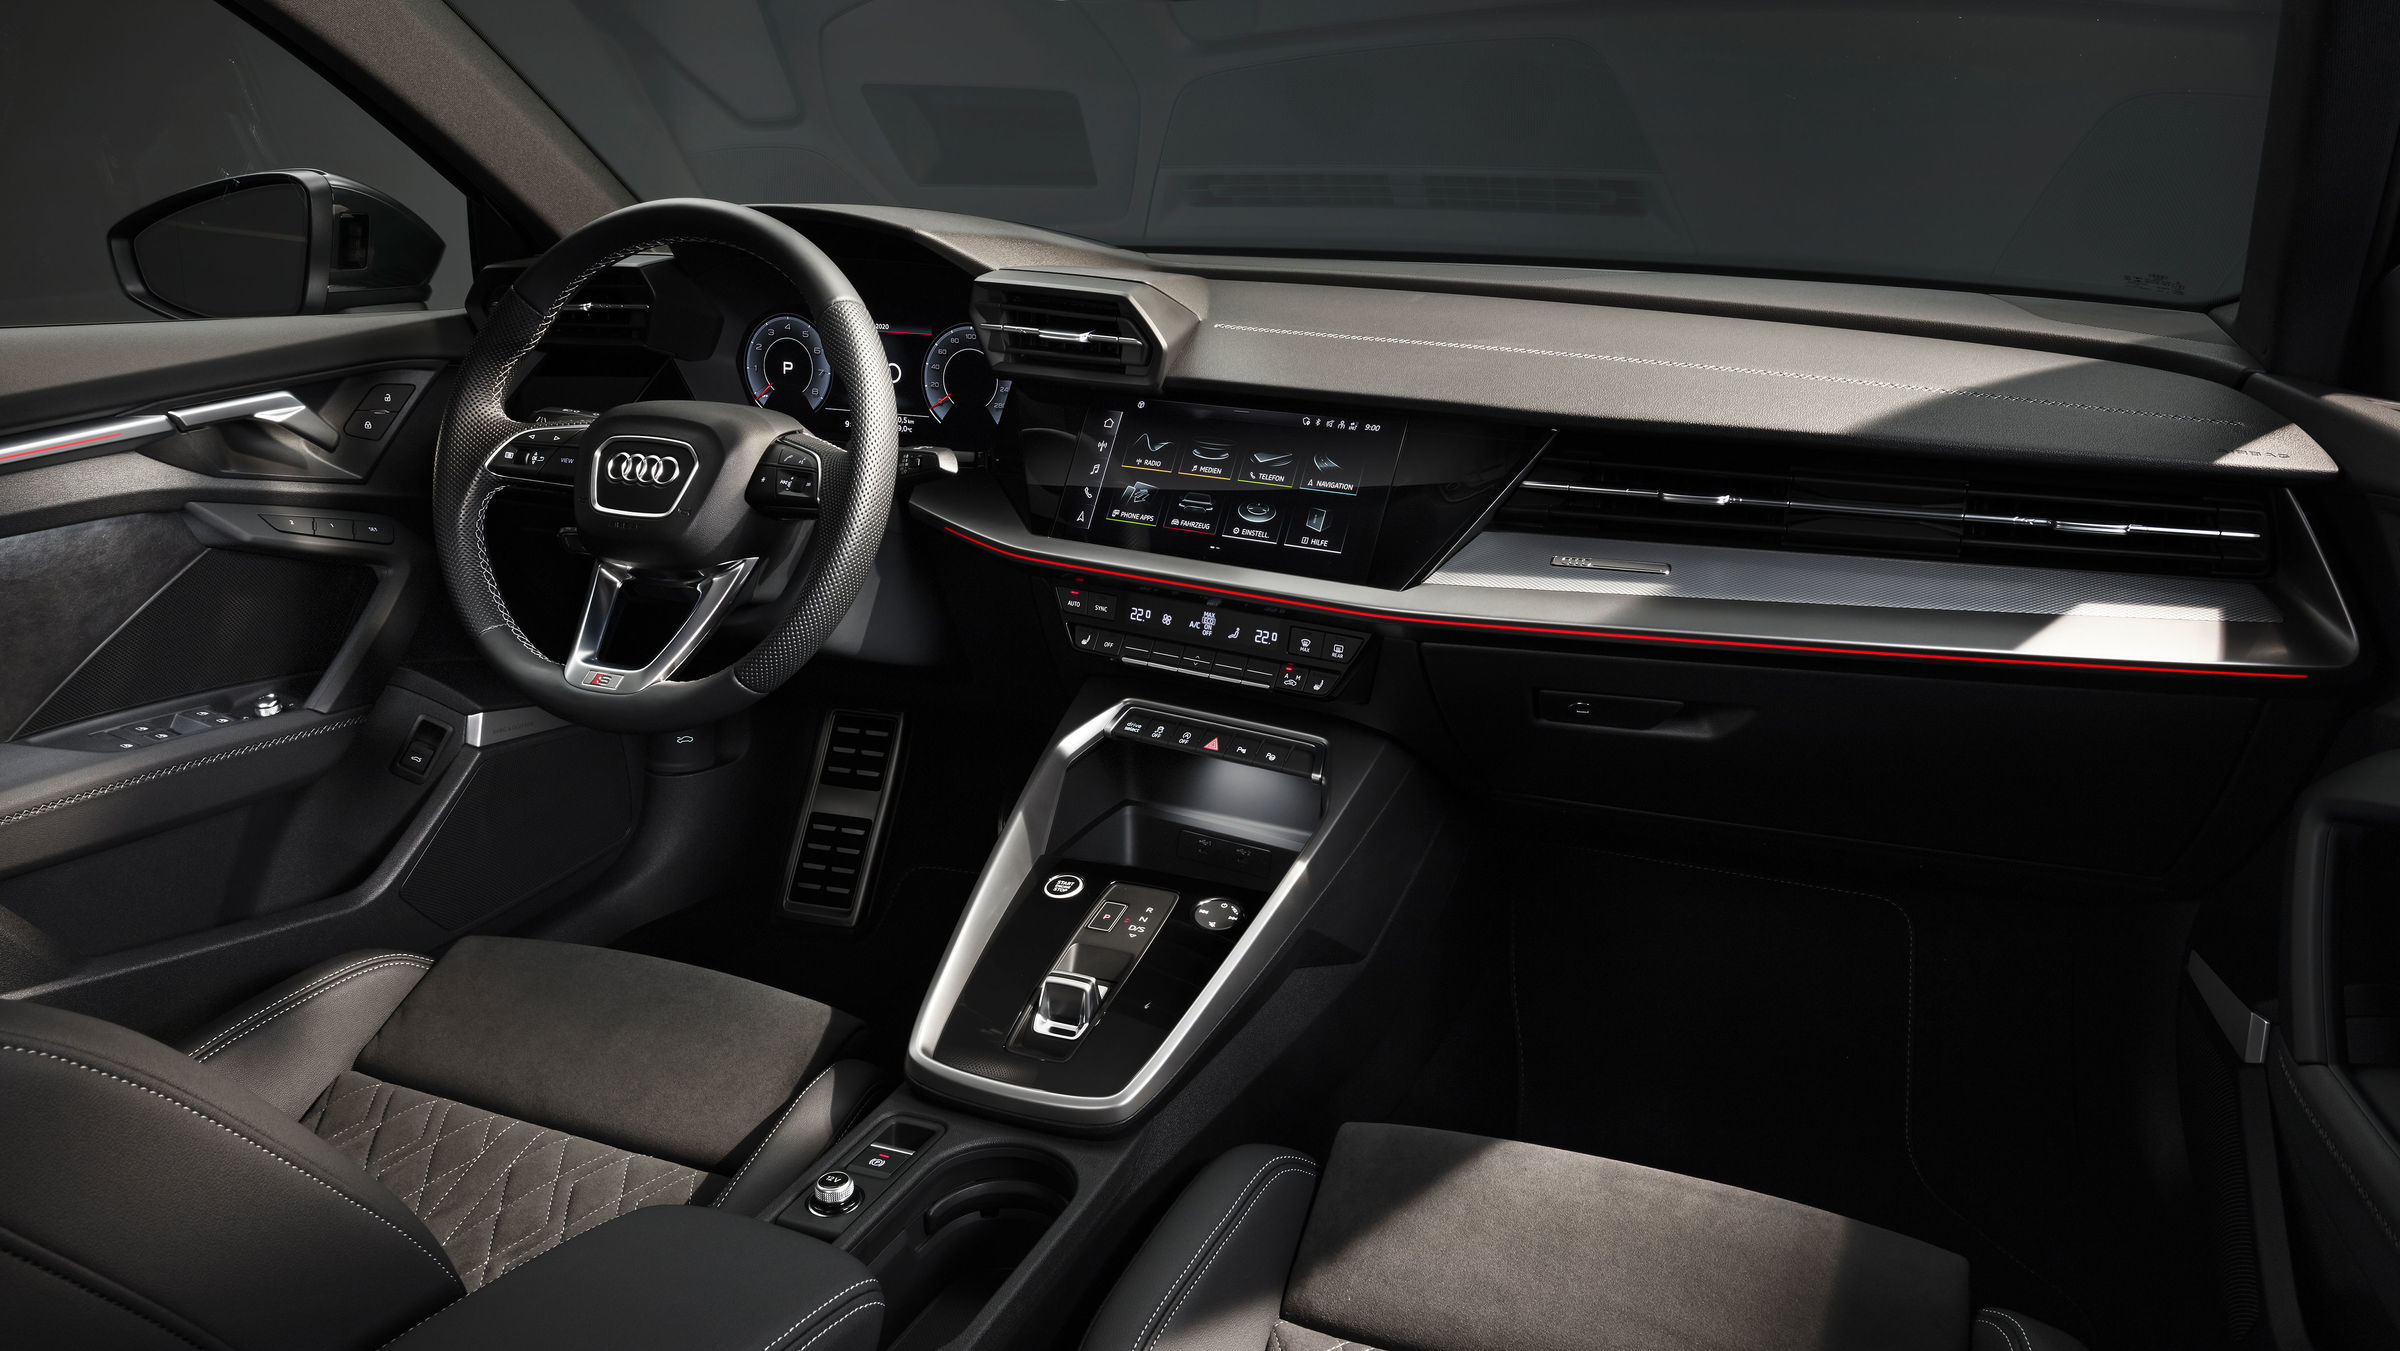 The cockpit of the new A3 Sedan is entirely focused on the driver.